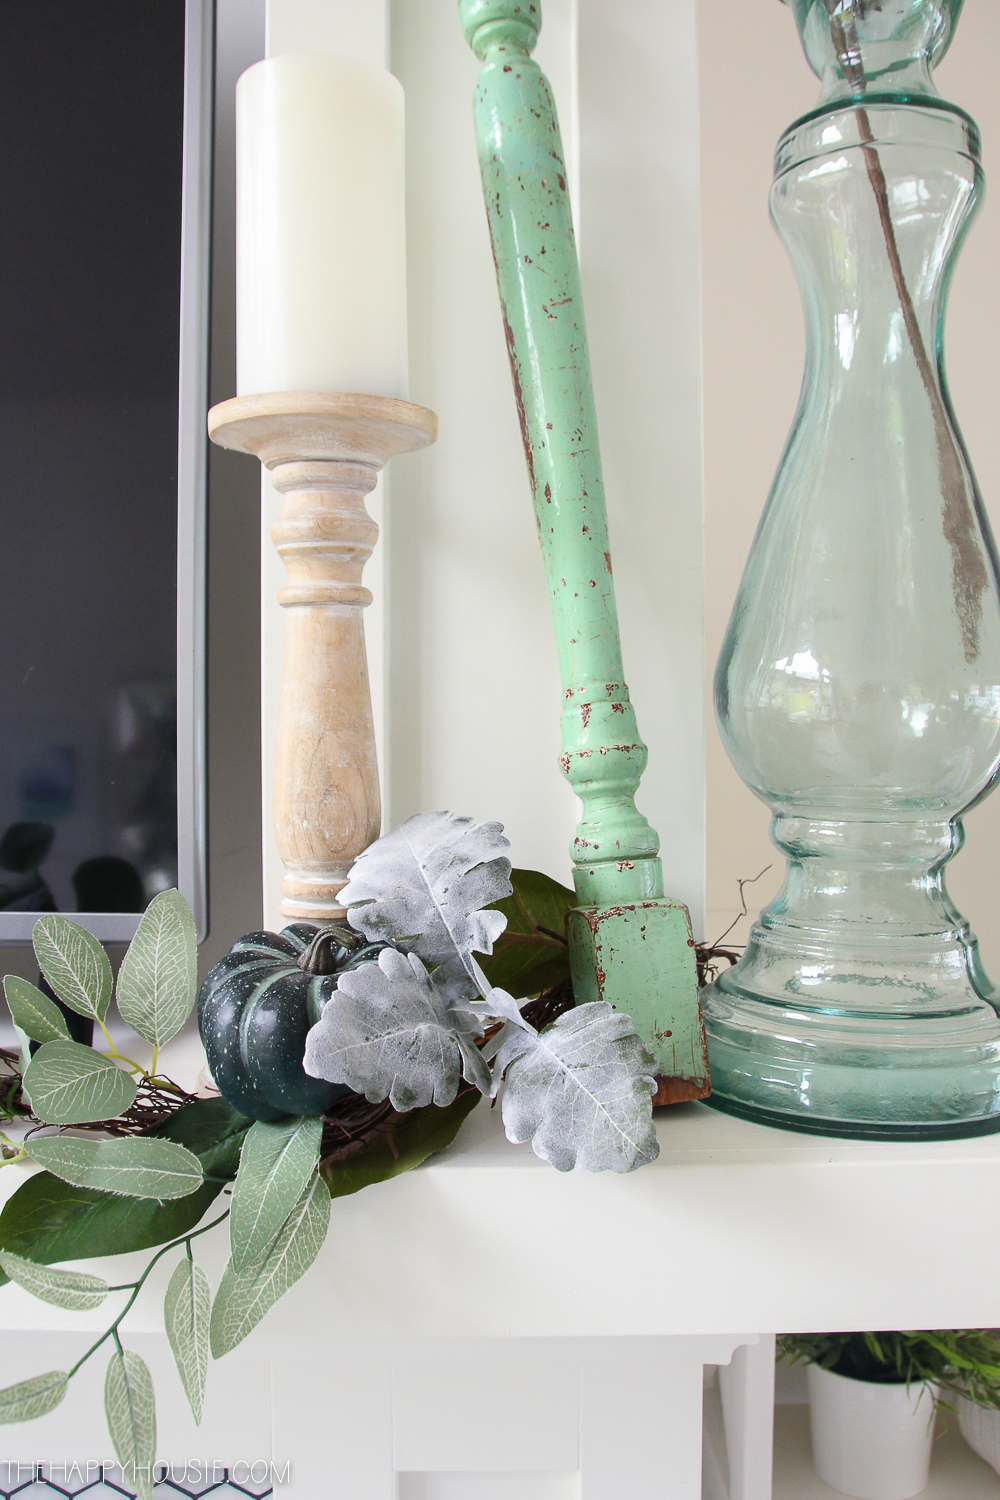 A candle, clear green glass bottle and a small pumpkin is on the mantel.